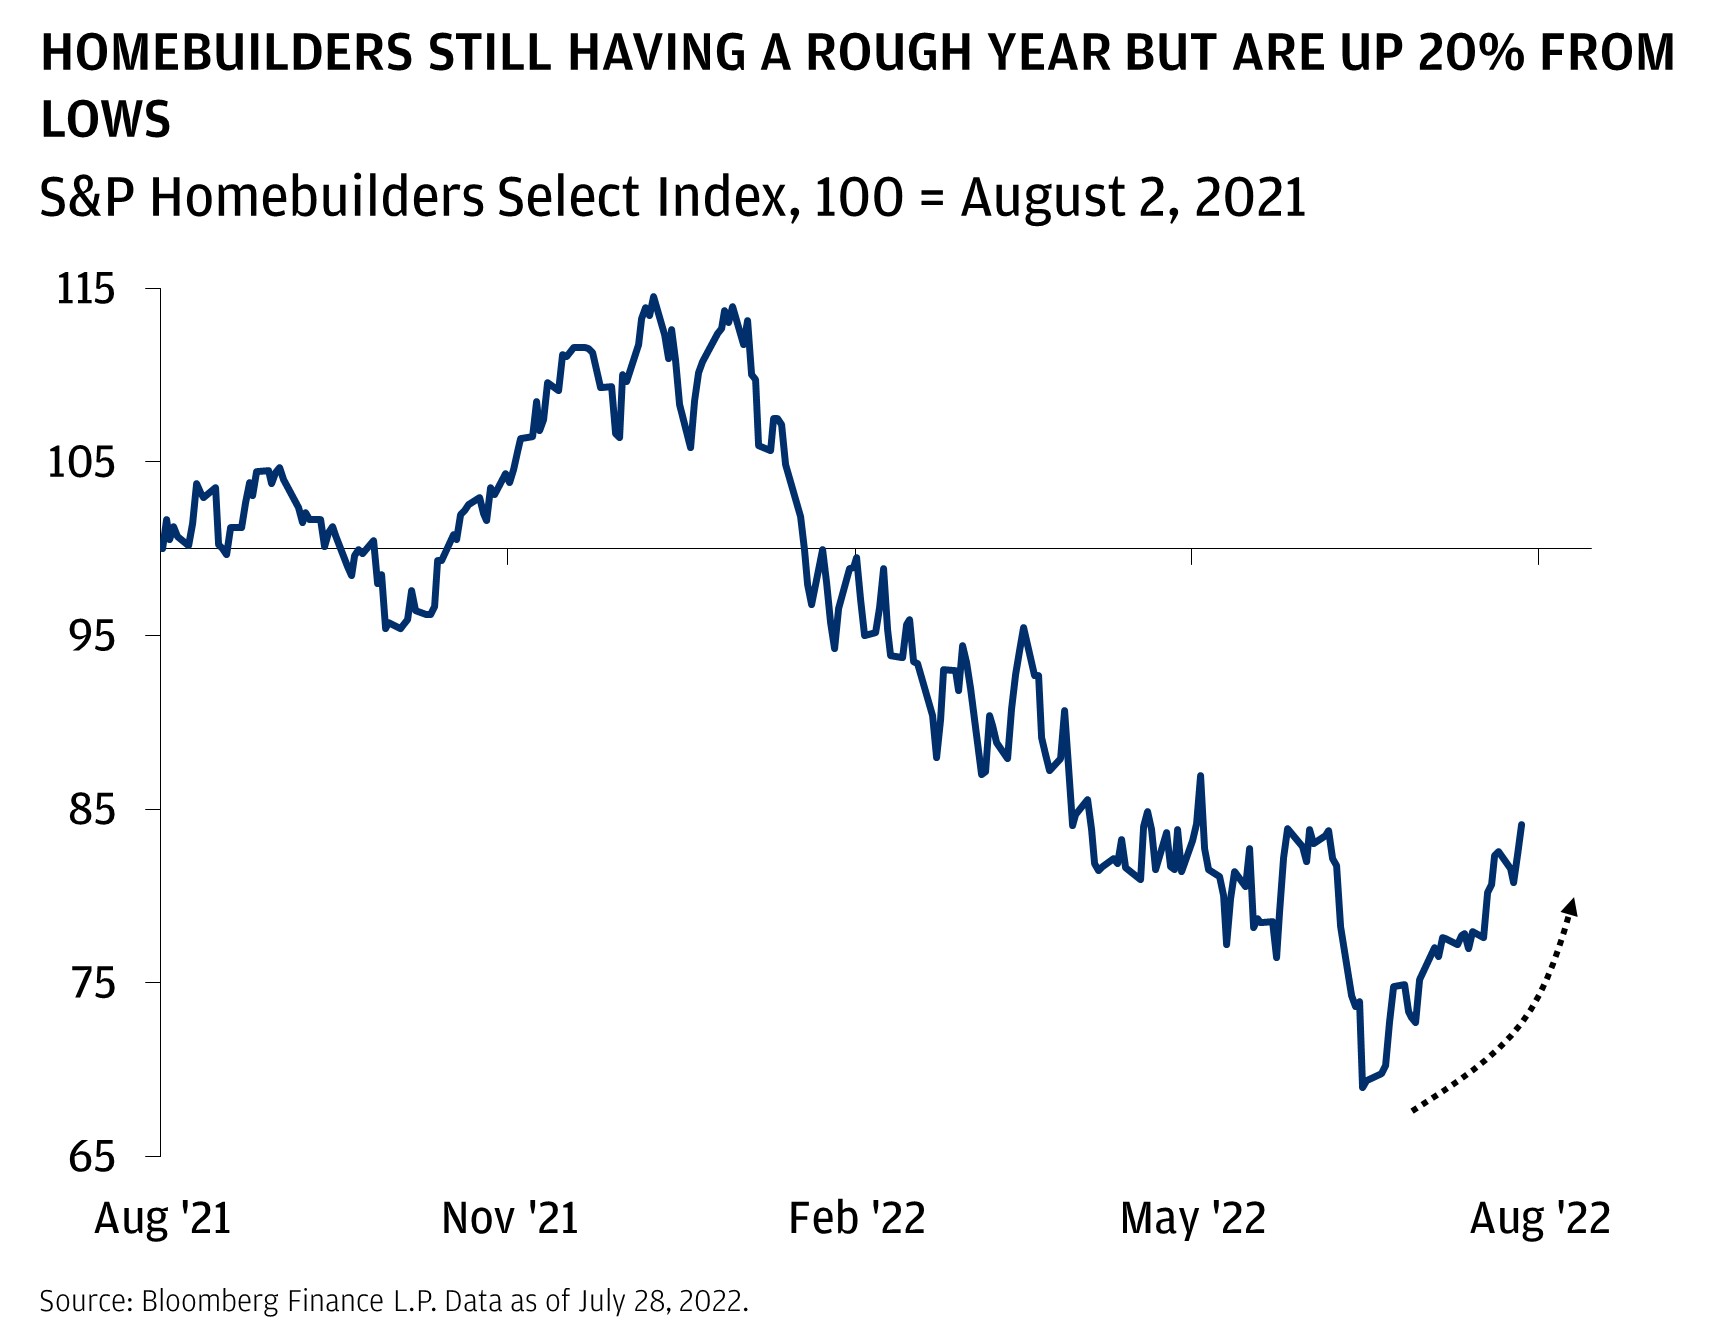 This chart shows the S&P Select Homebuilders Index from August 2021 to July 2022, indexed to 100 = August 2, 2021.